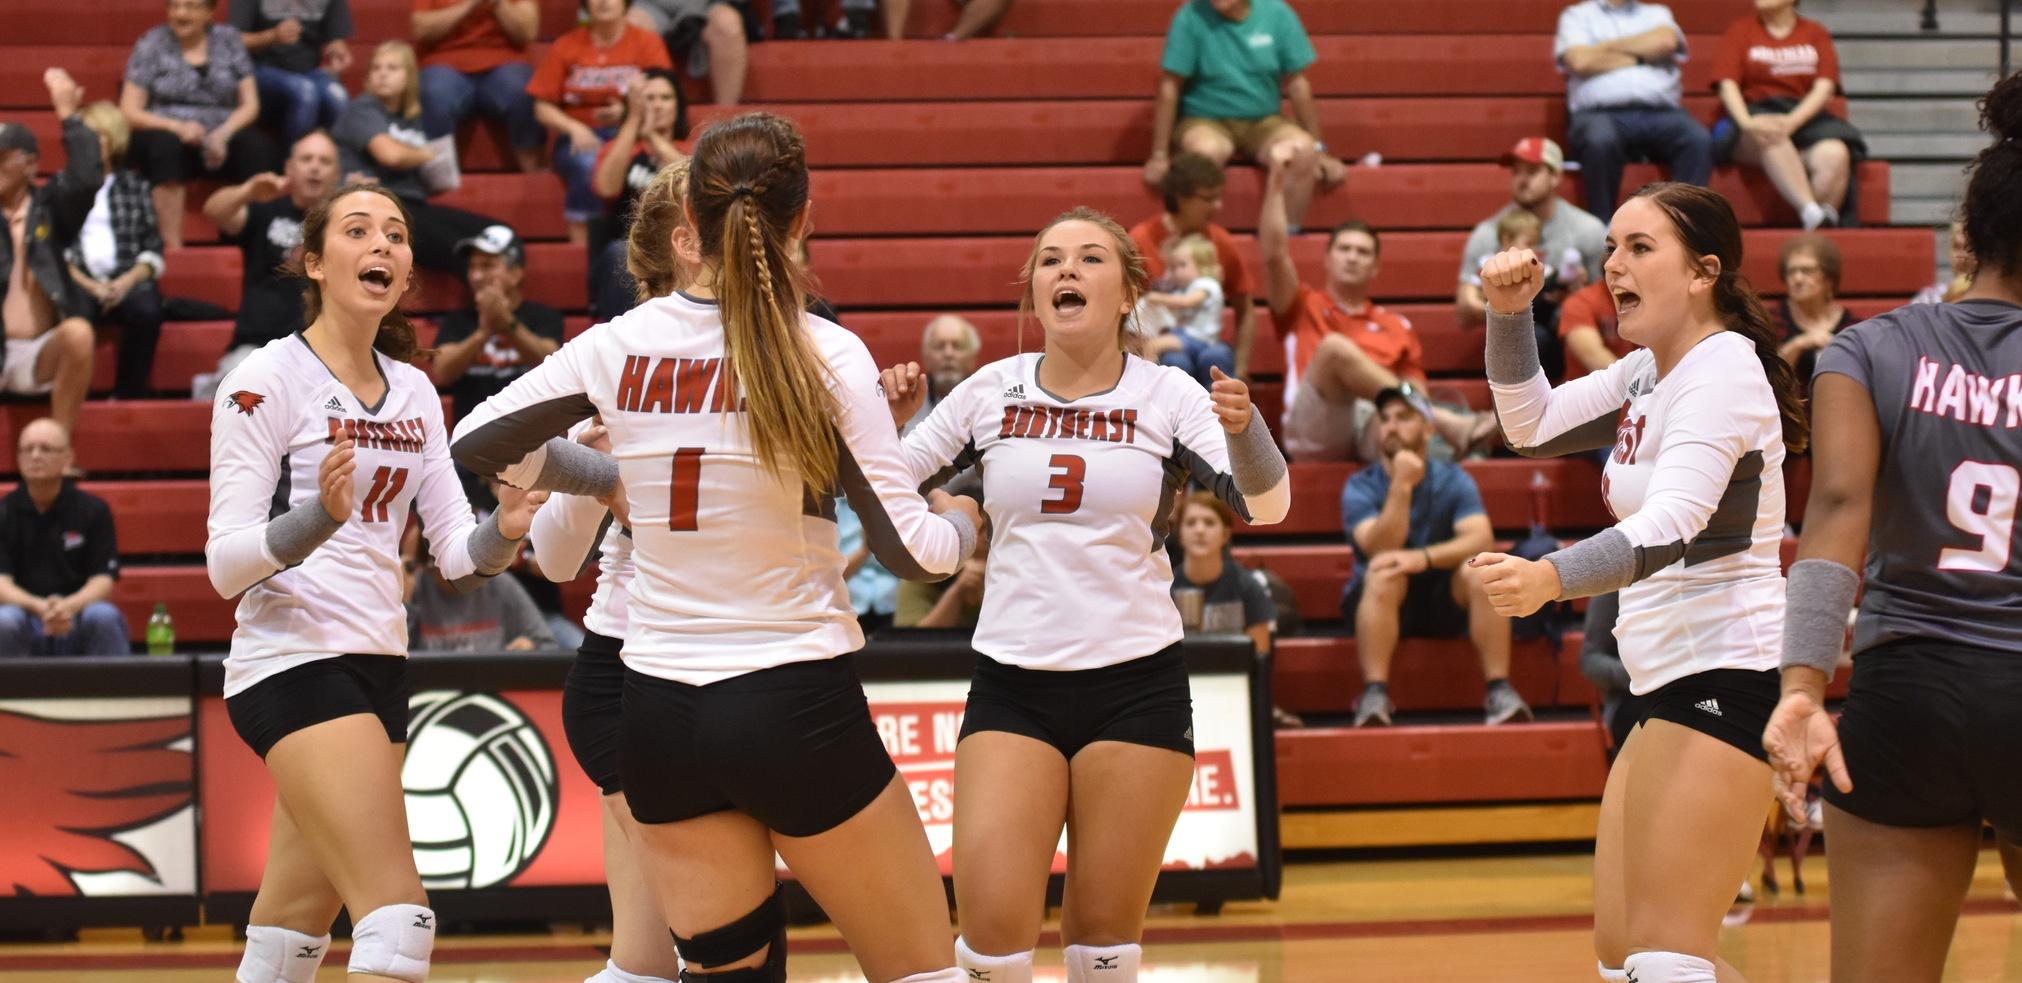 Hawks volleyball competes at Pizza Hut Invitational